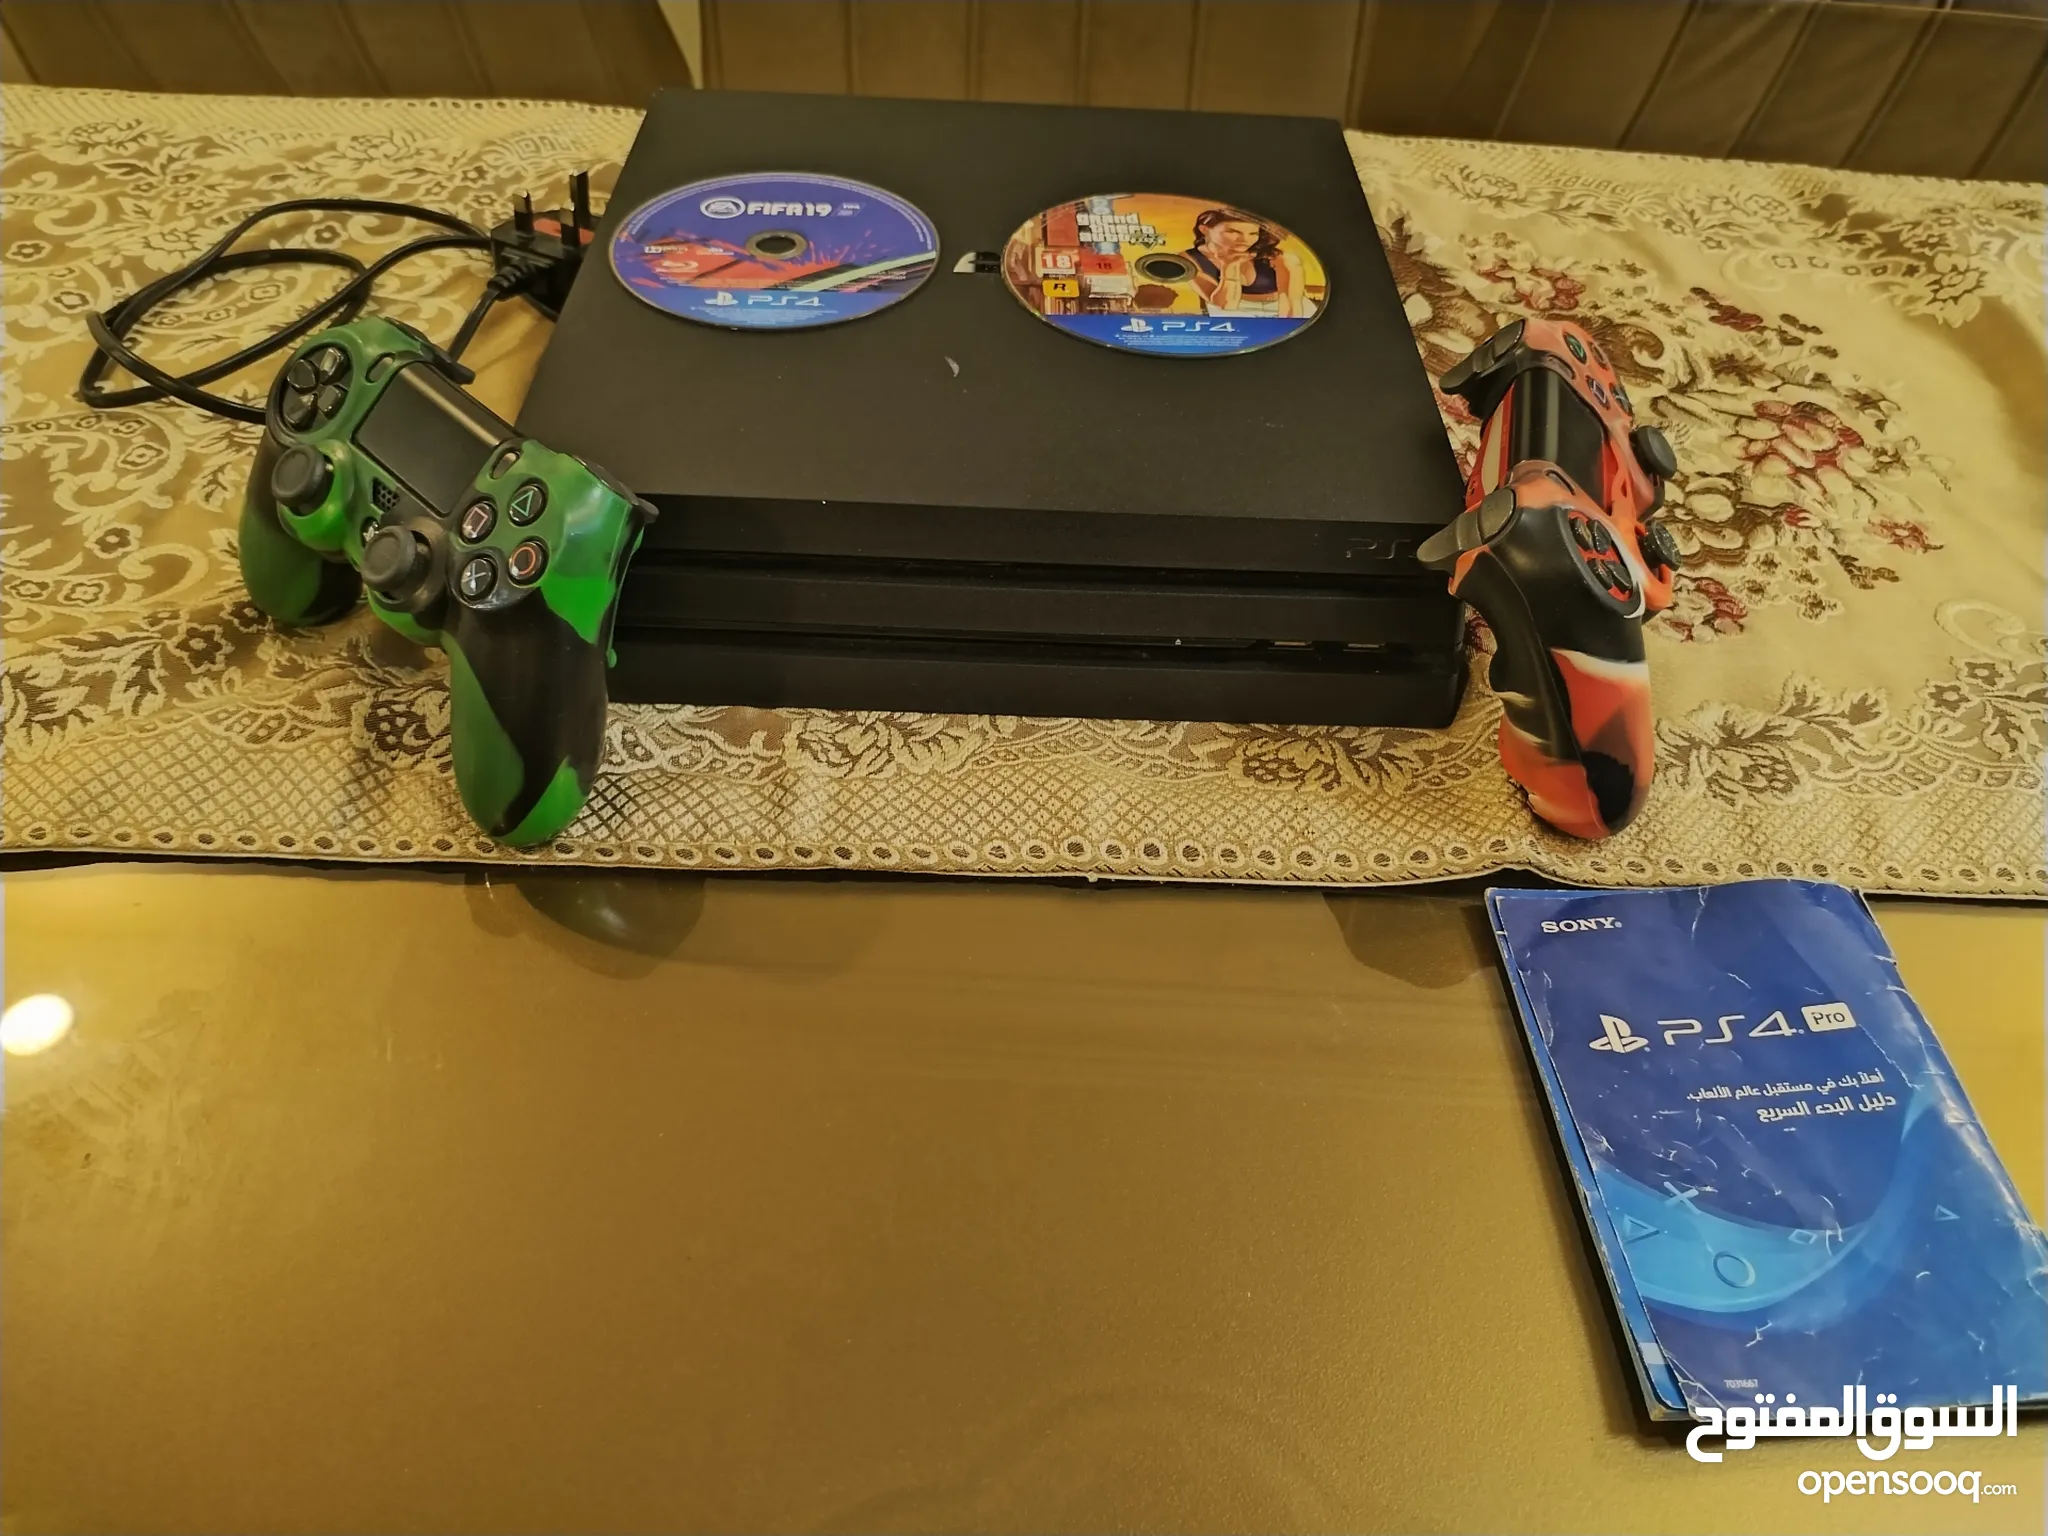 Playstation 4 Pro For Sale in Zarqa : Used : Best Prices | OpenSooq